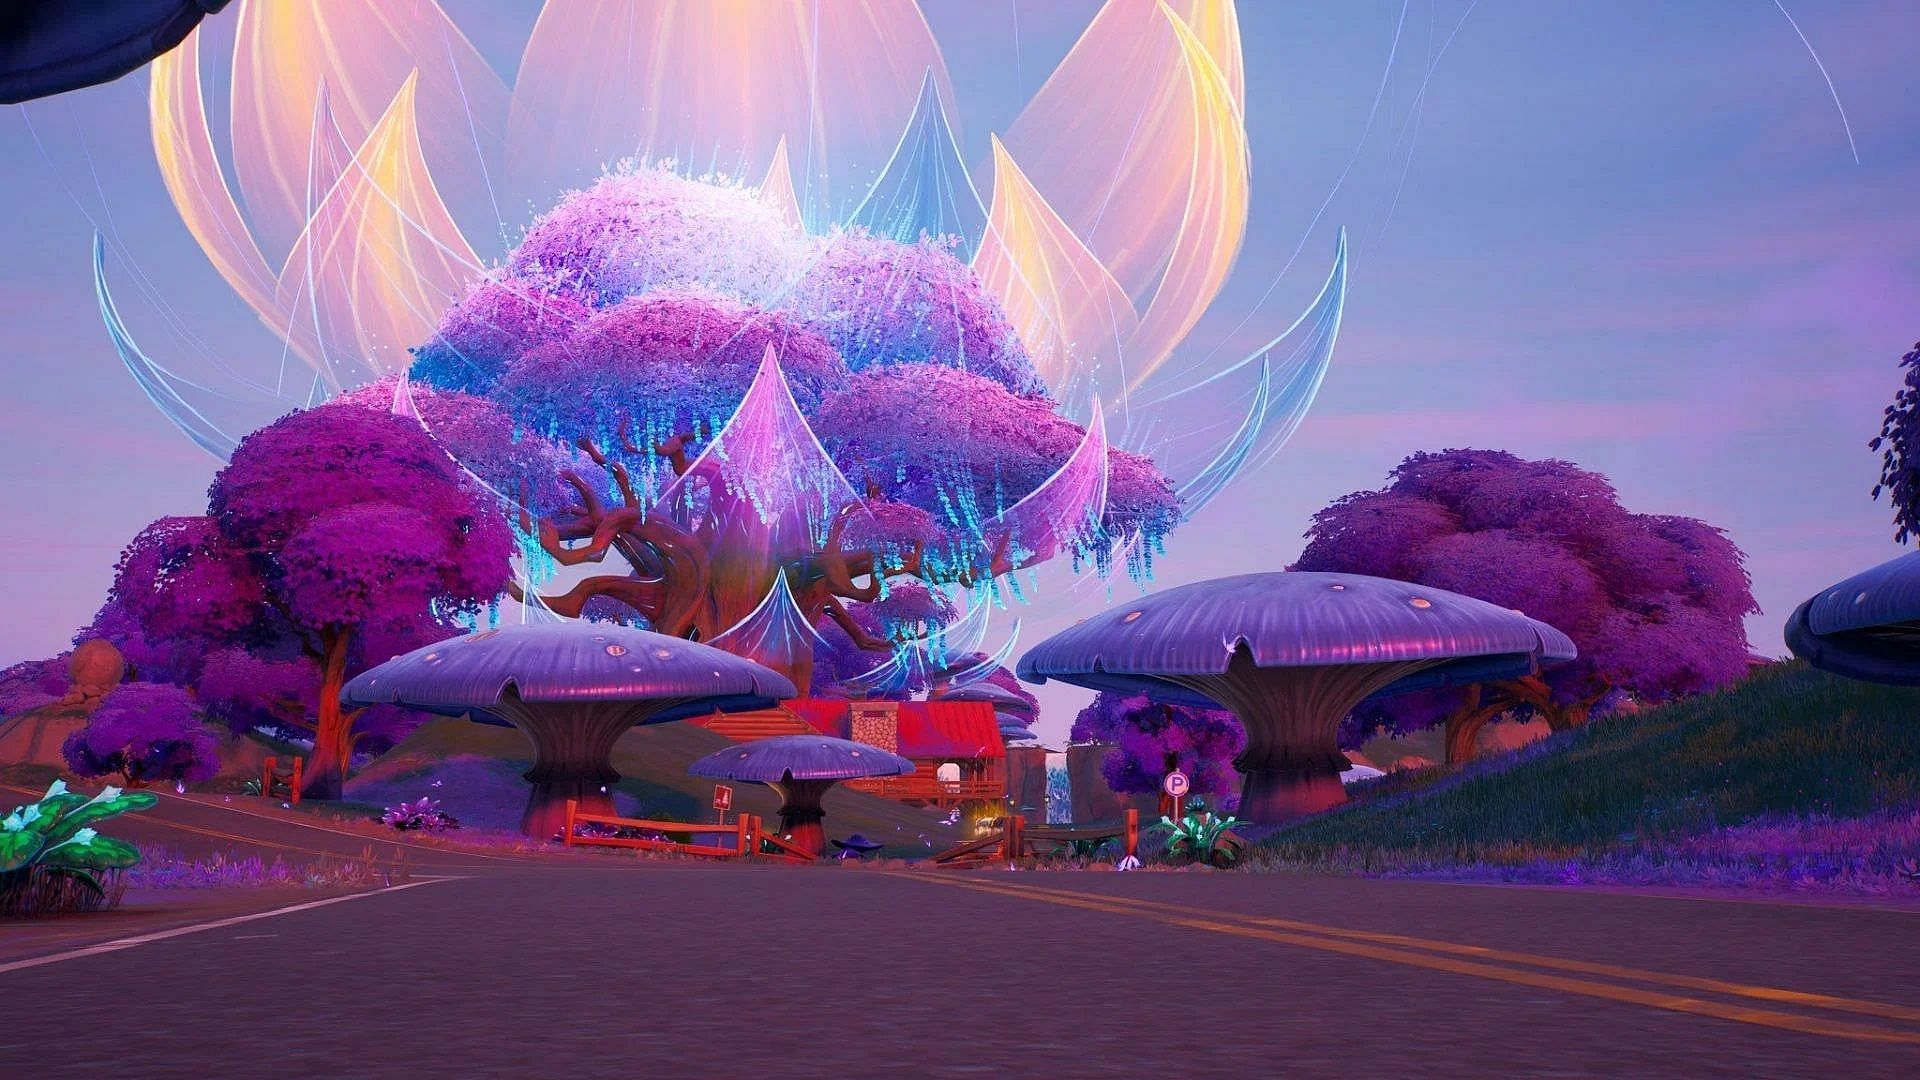 Reality biome is a new biome that was released with Fortnite Chapter 3 Season 3 (Image via Epic Games)